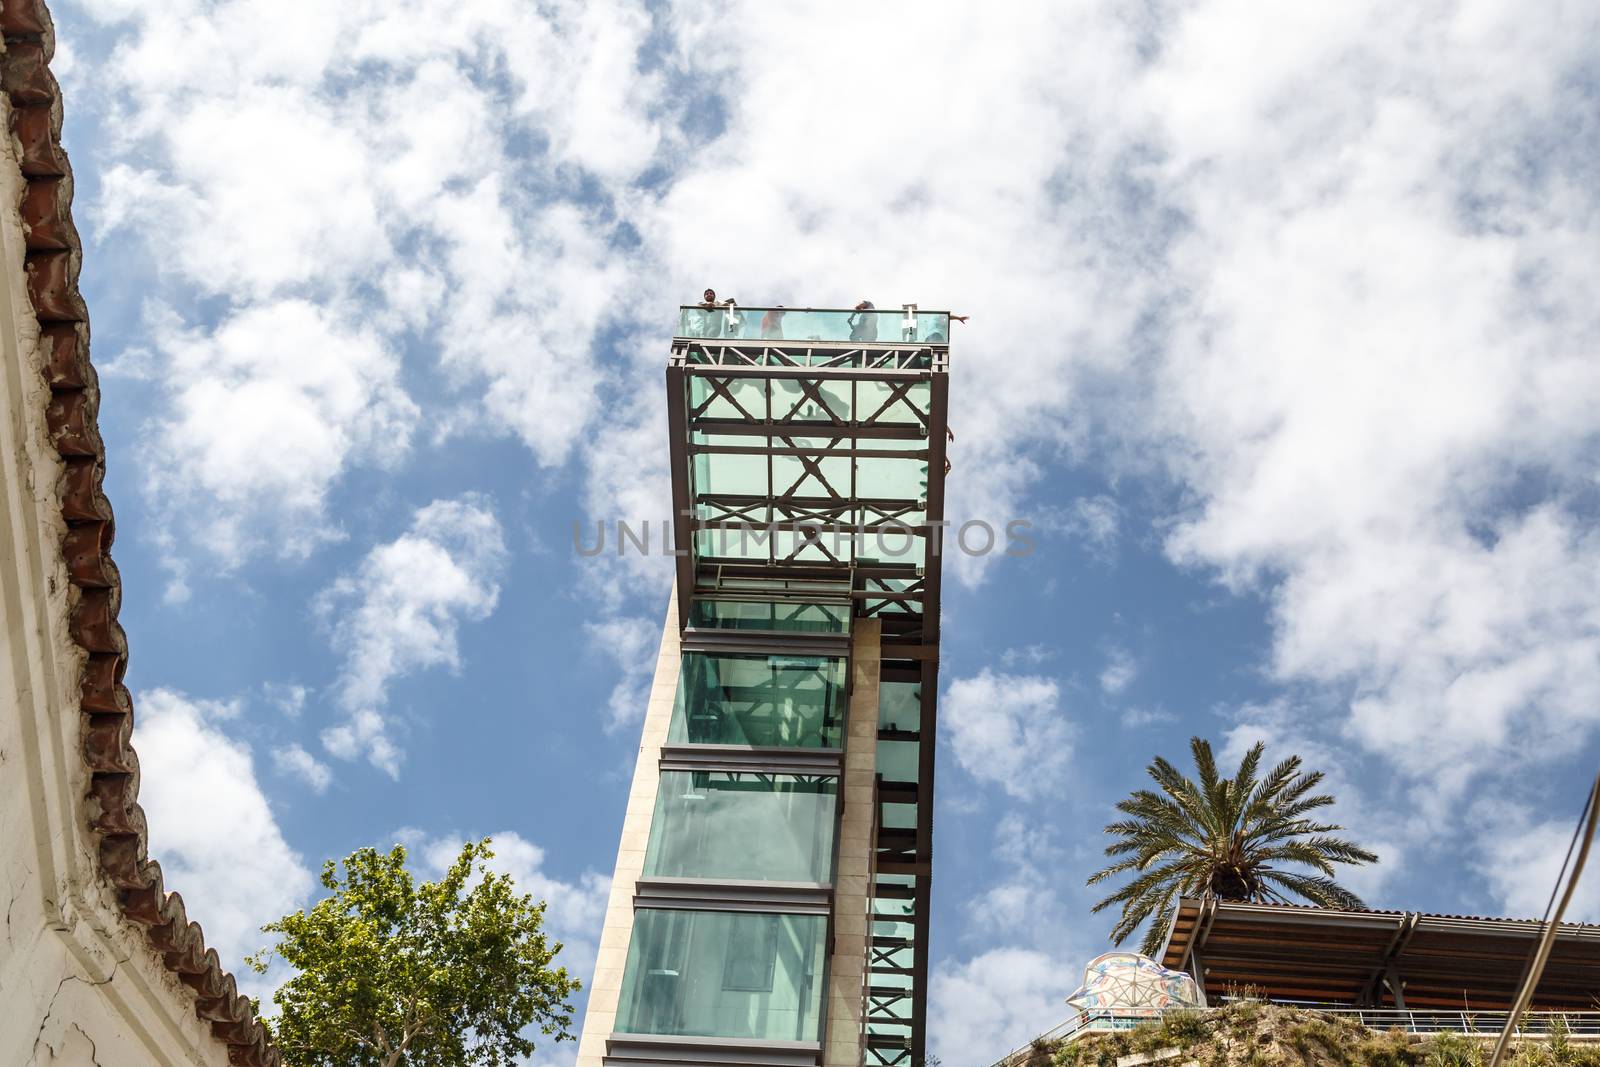 Bottom view of lift with glass observation terrace in Antalya Kaleici on cloudy blue sky background.